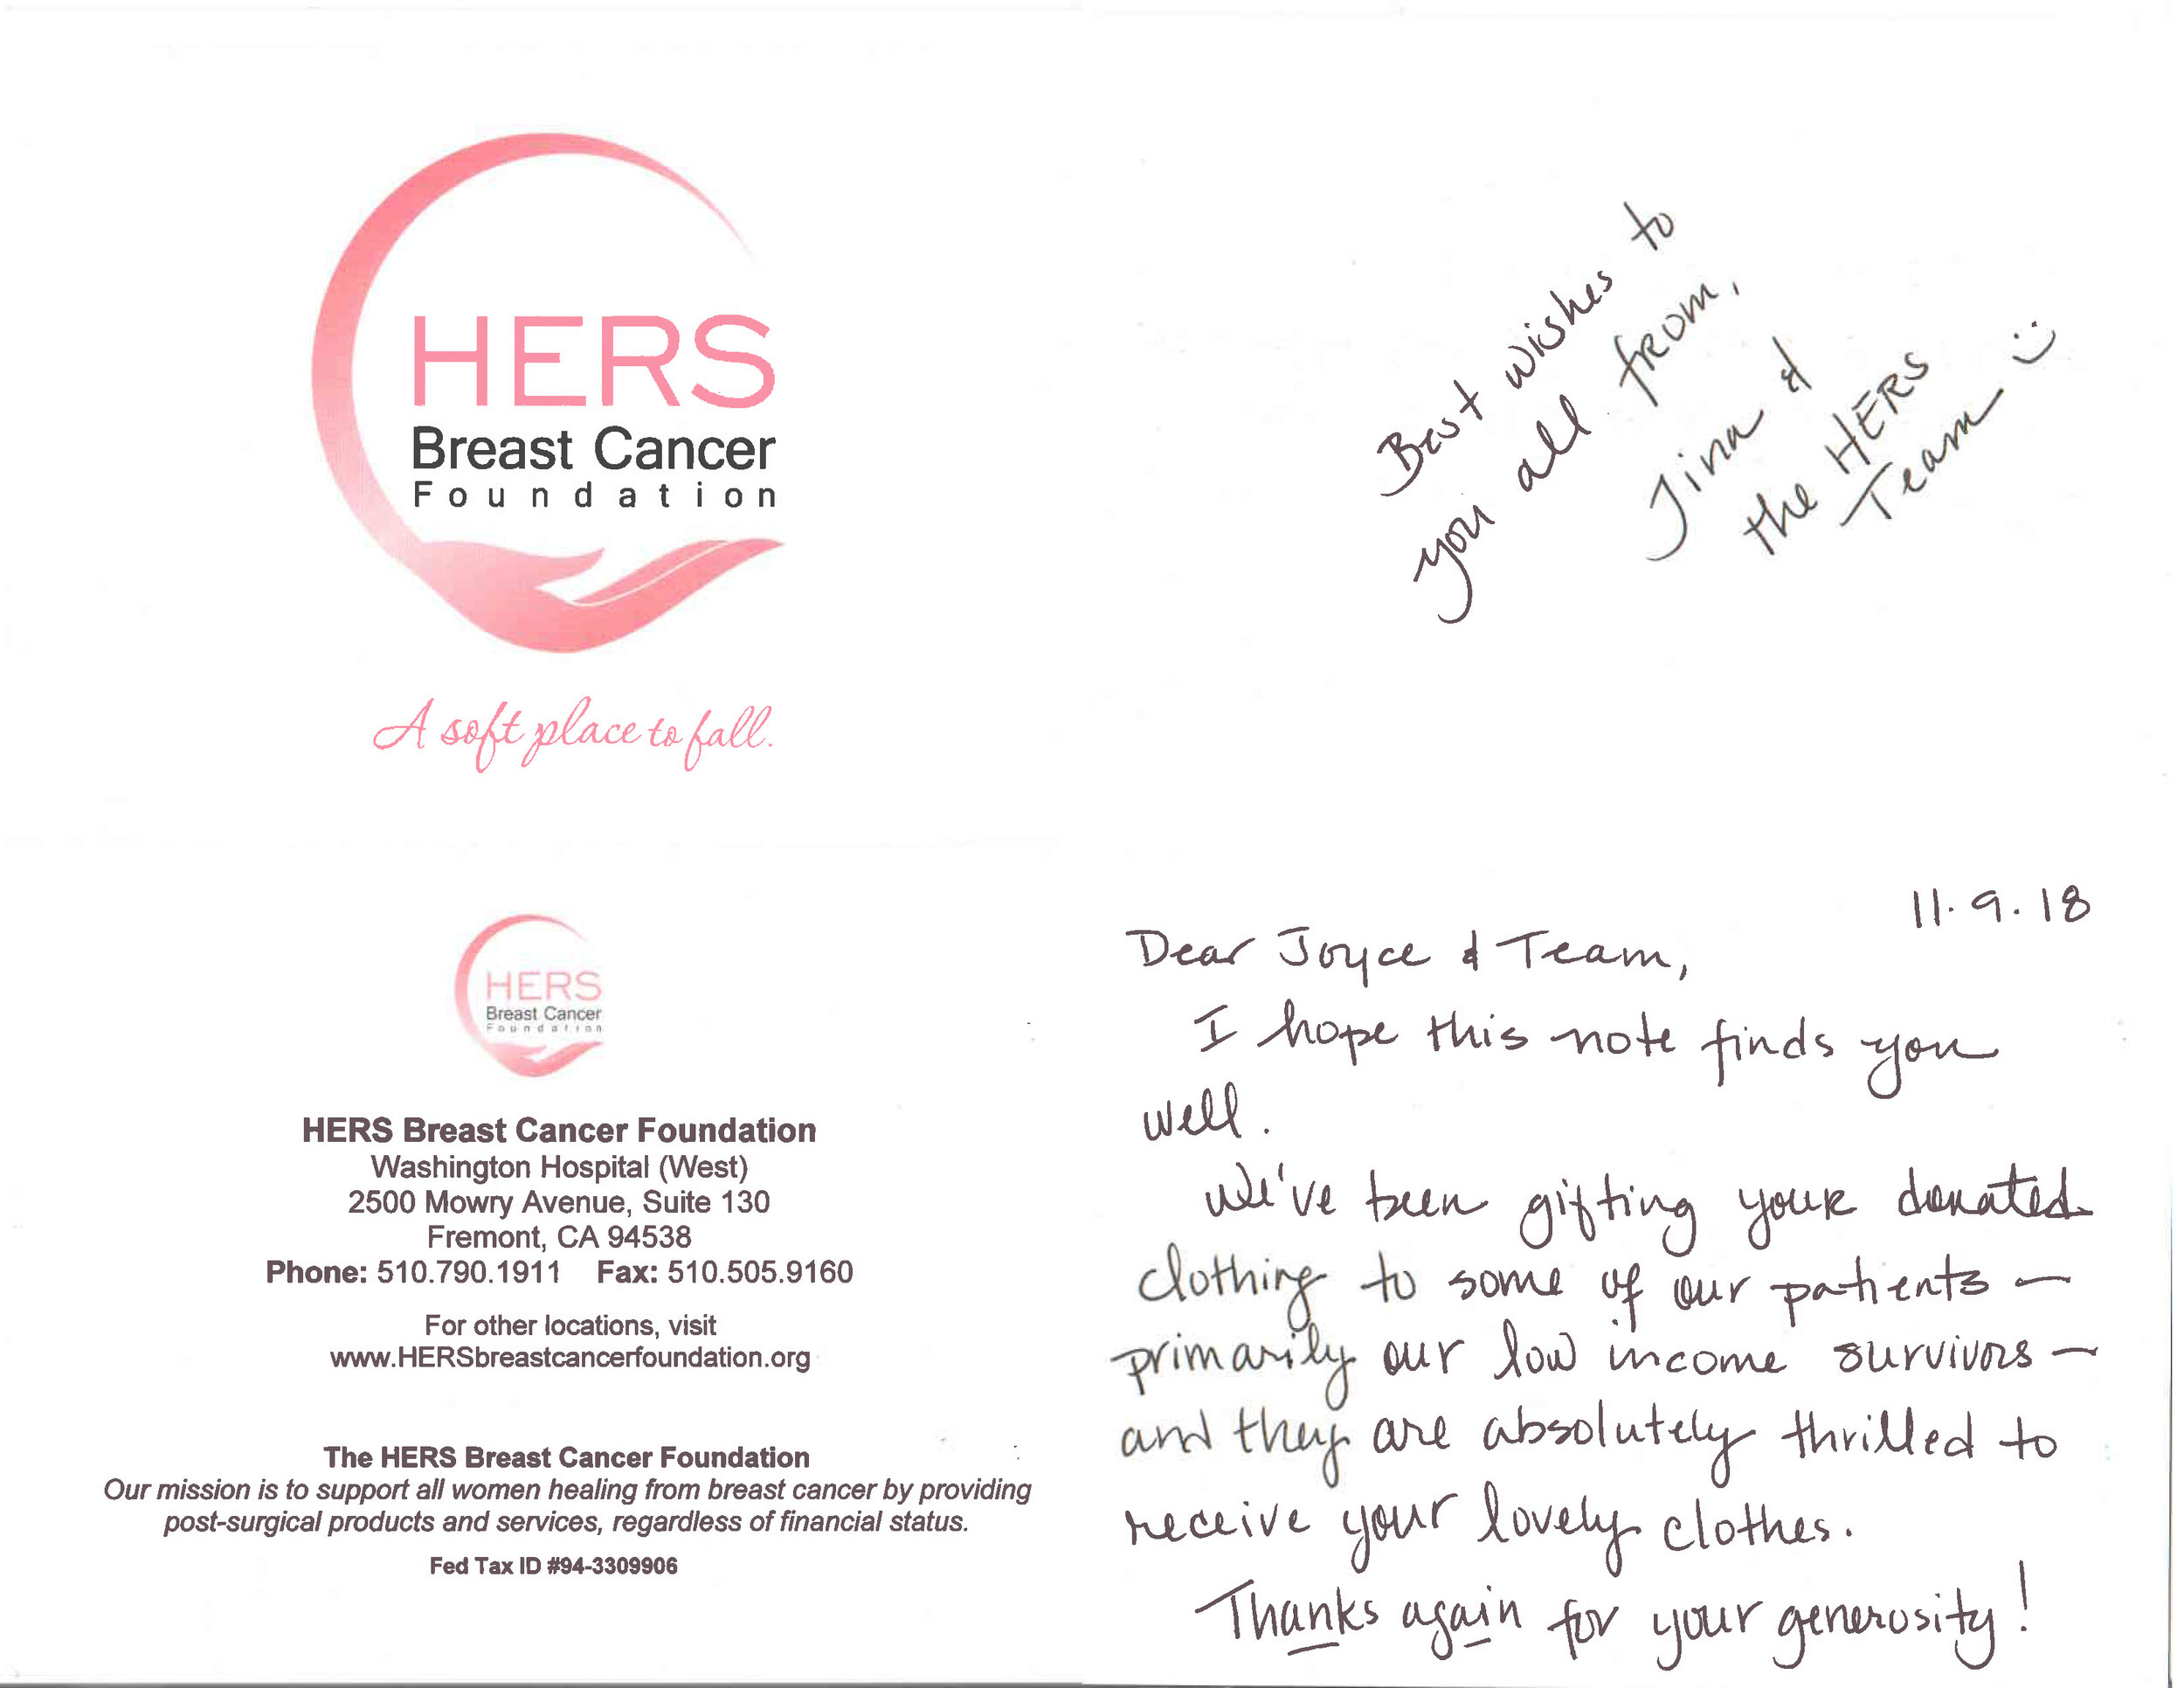 Thank You Letter from HERS 11.9.18.jpg